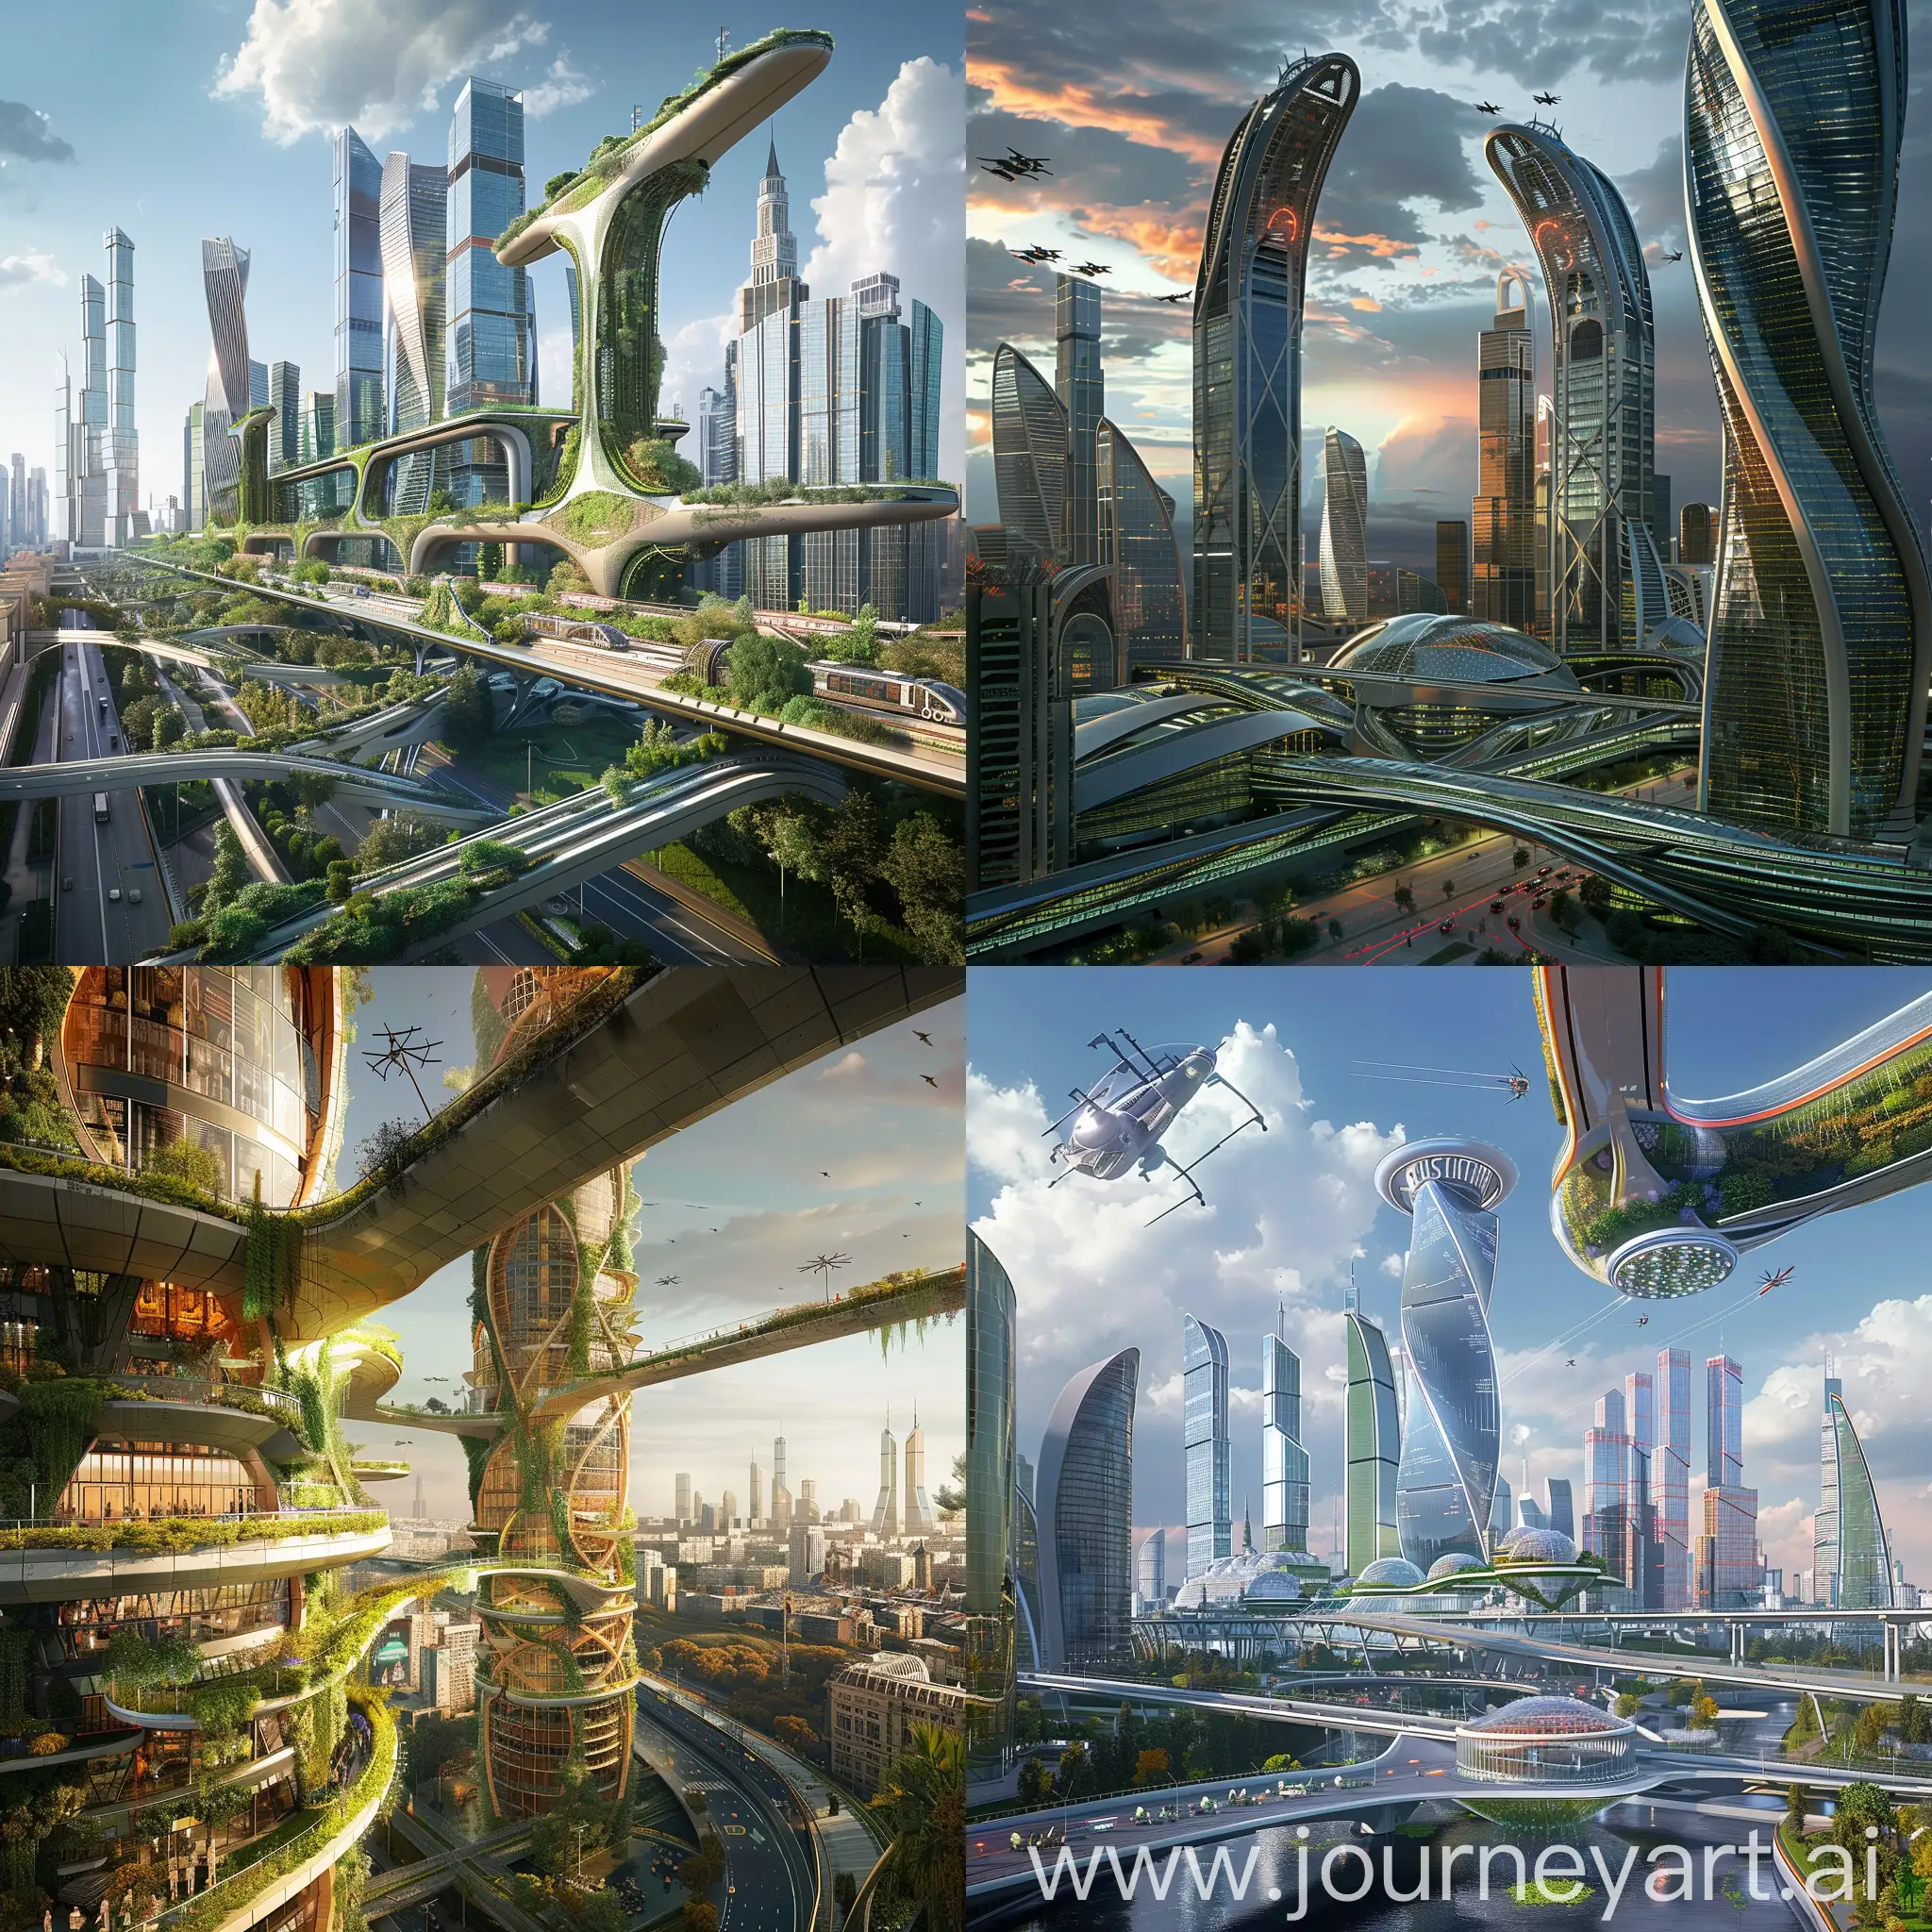 Sci-Fi Moscow, Advanced Science and Technology, Vertical Farms, Energy-Generating Pavements, Smart Windows, Drone Delivery Ports, Waste-to-Energy Systems, Water Reclamation Infrastructure, Biophilic Designs, AI-Managed Microgrids, Hyperloop Transit Hubs, Nano-structured Building Materials, Self-Cleaning Buildings, Solar Skin Facades, Atmospheric Water Generators, Green Bridges, Interactive Public Art, Eco-Friendly Public Transport, Urban Wind Turbines, Responsive Street Lighting, Climate-Adaptive Structures, Holographic Signage, In Unreal Engine 5 Style --stylize 1000